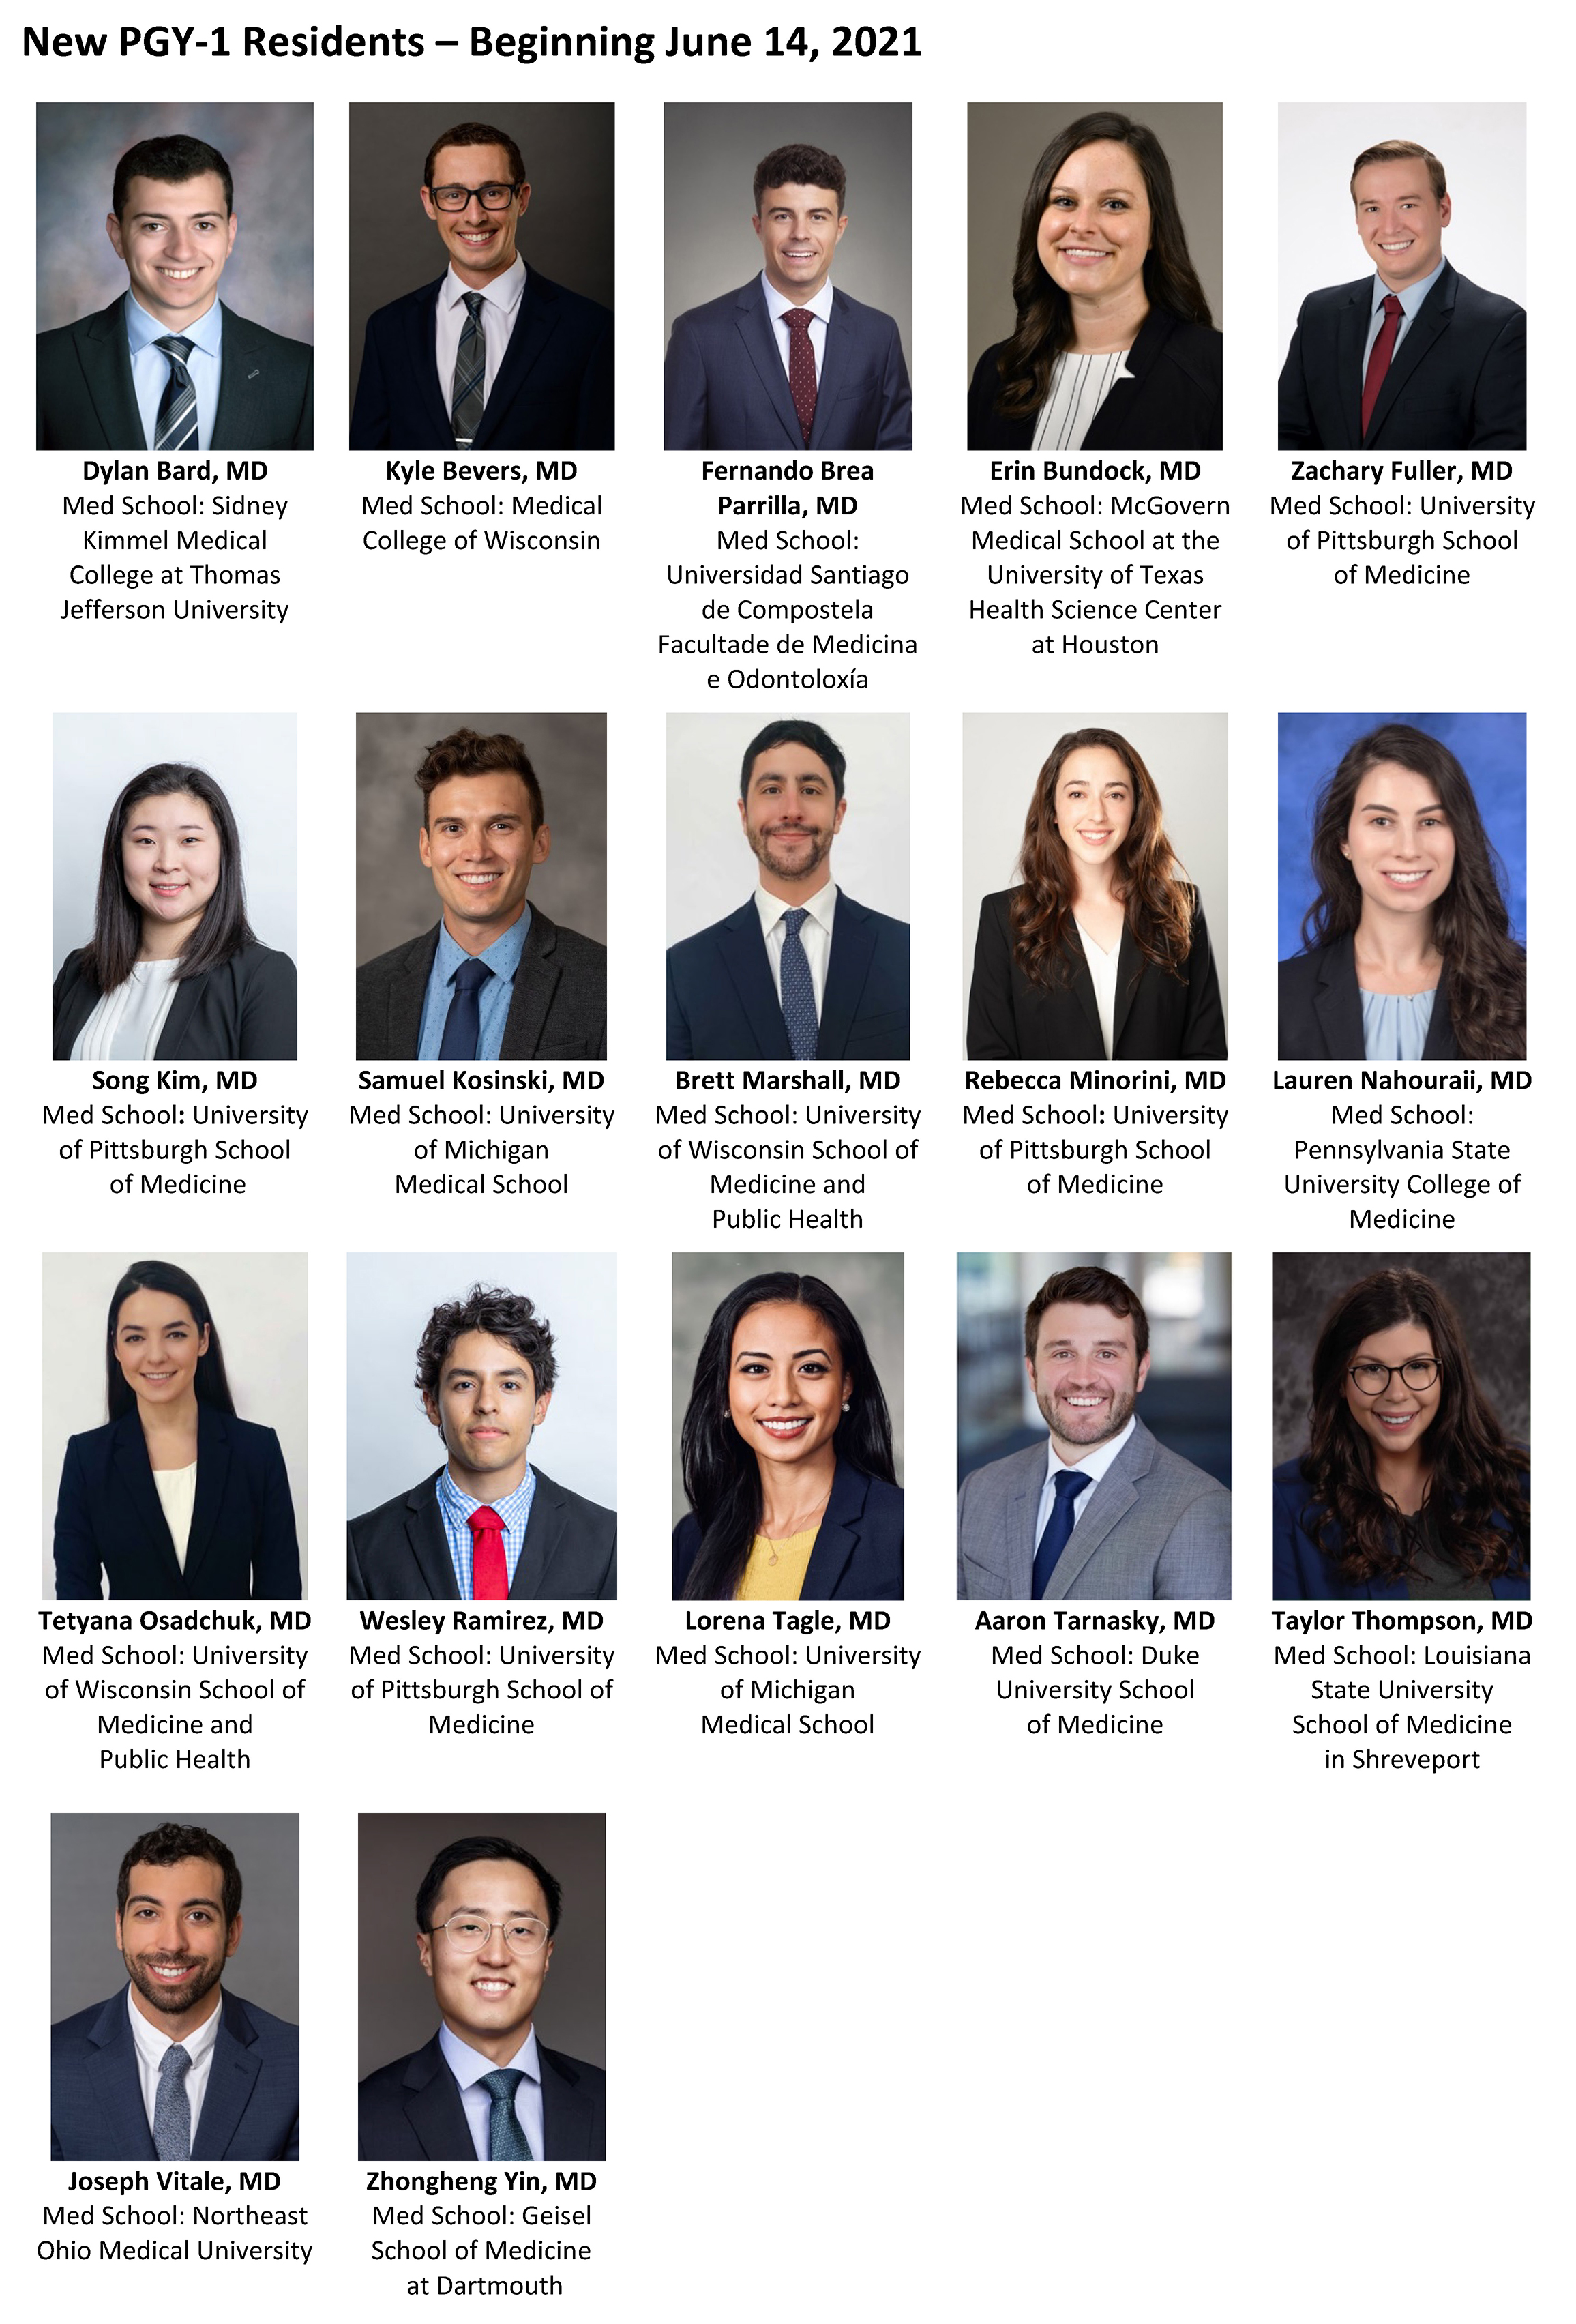 "Headshots of the PGY-1 Residents"